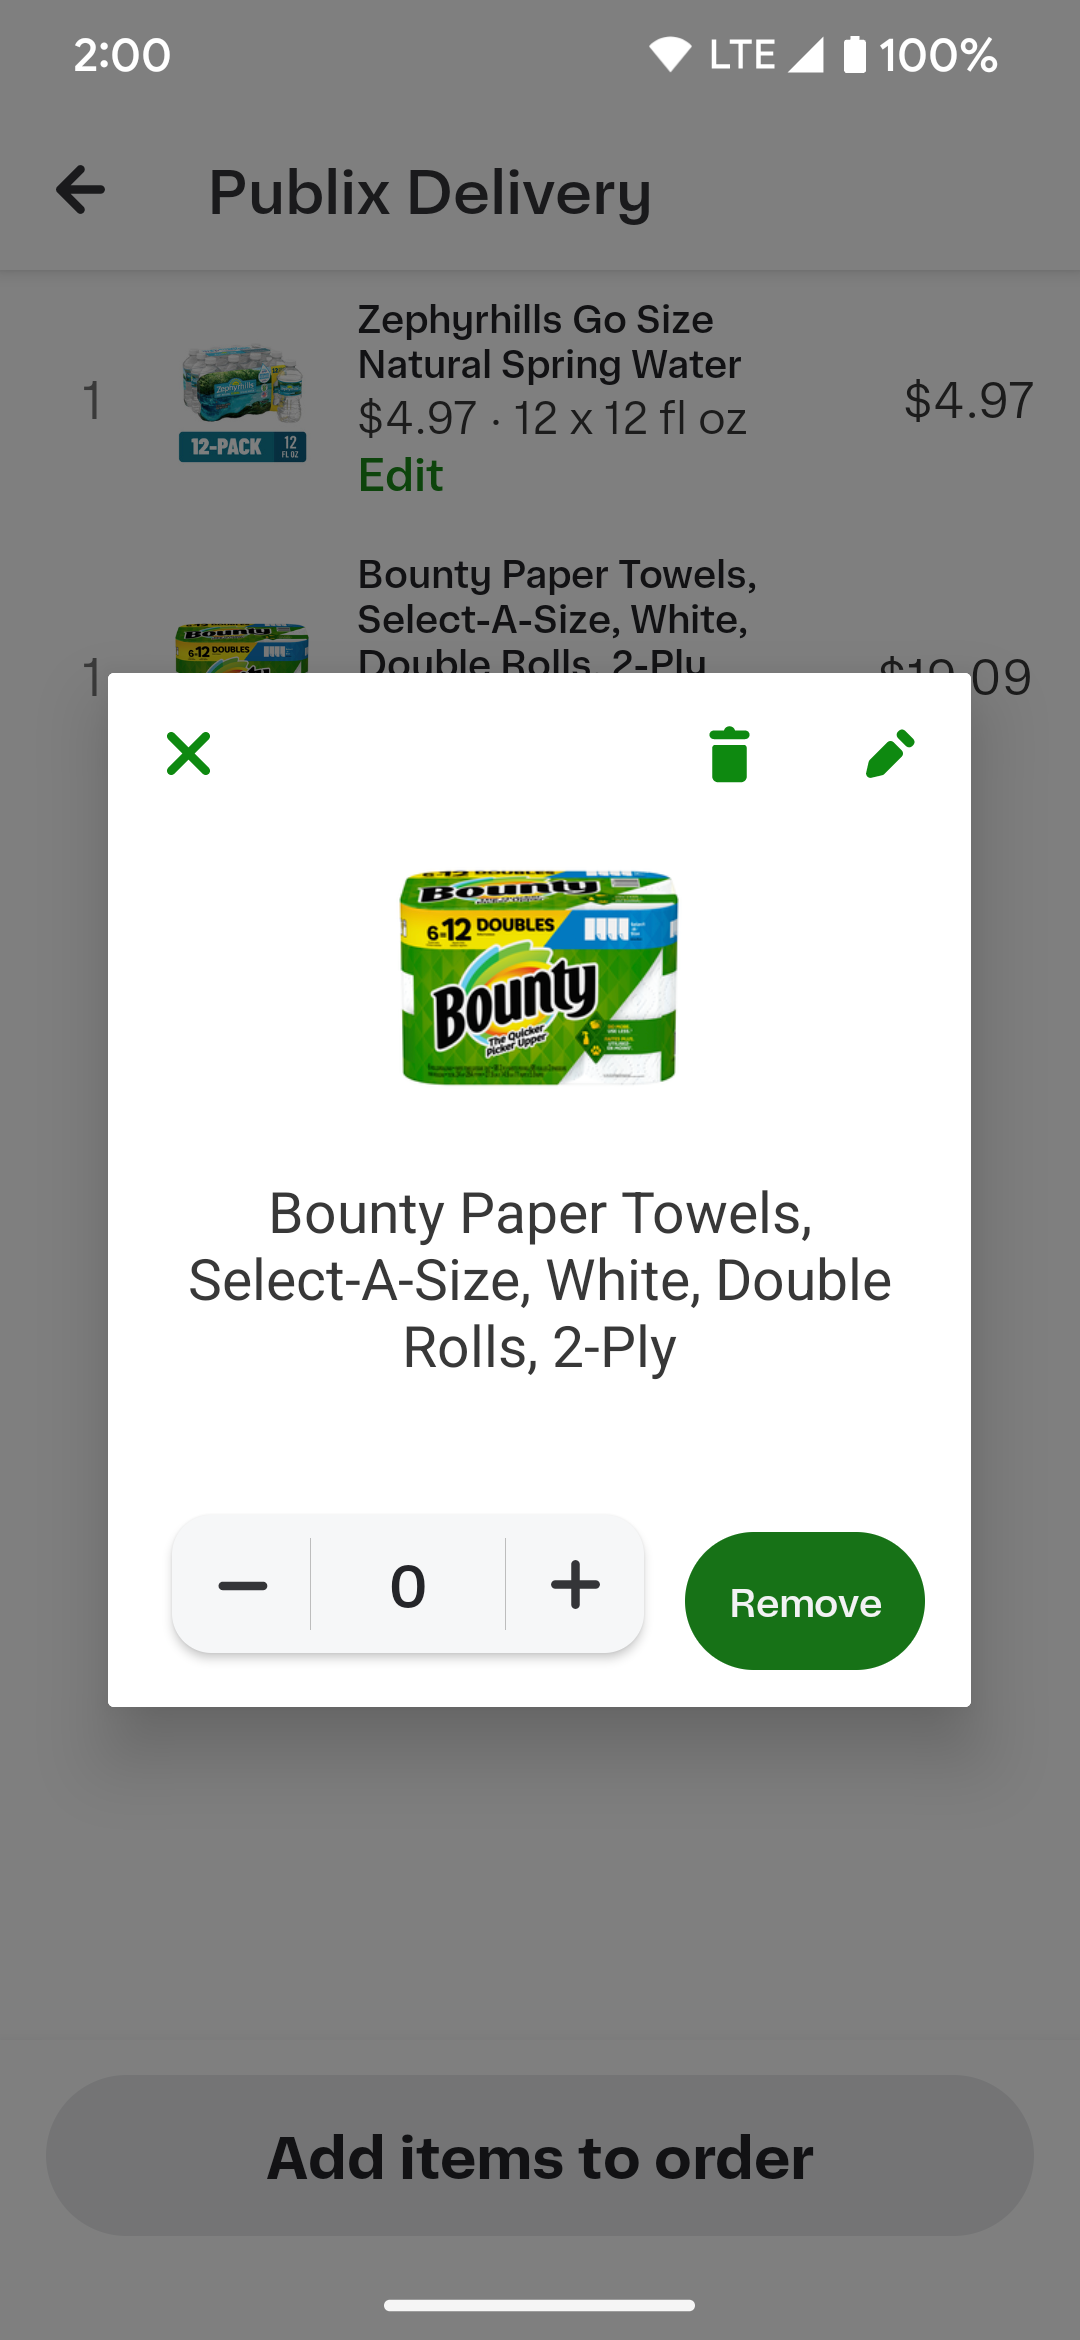 Setting the quantity to 0 and pressing the Remove button removes an item from the Instacart order.